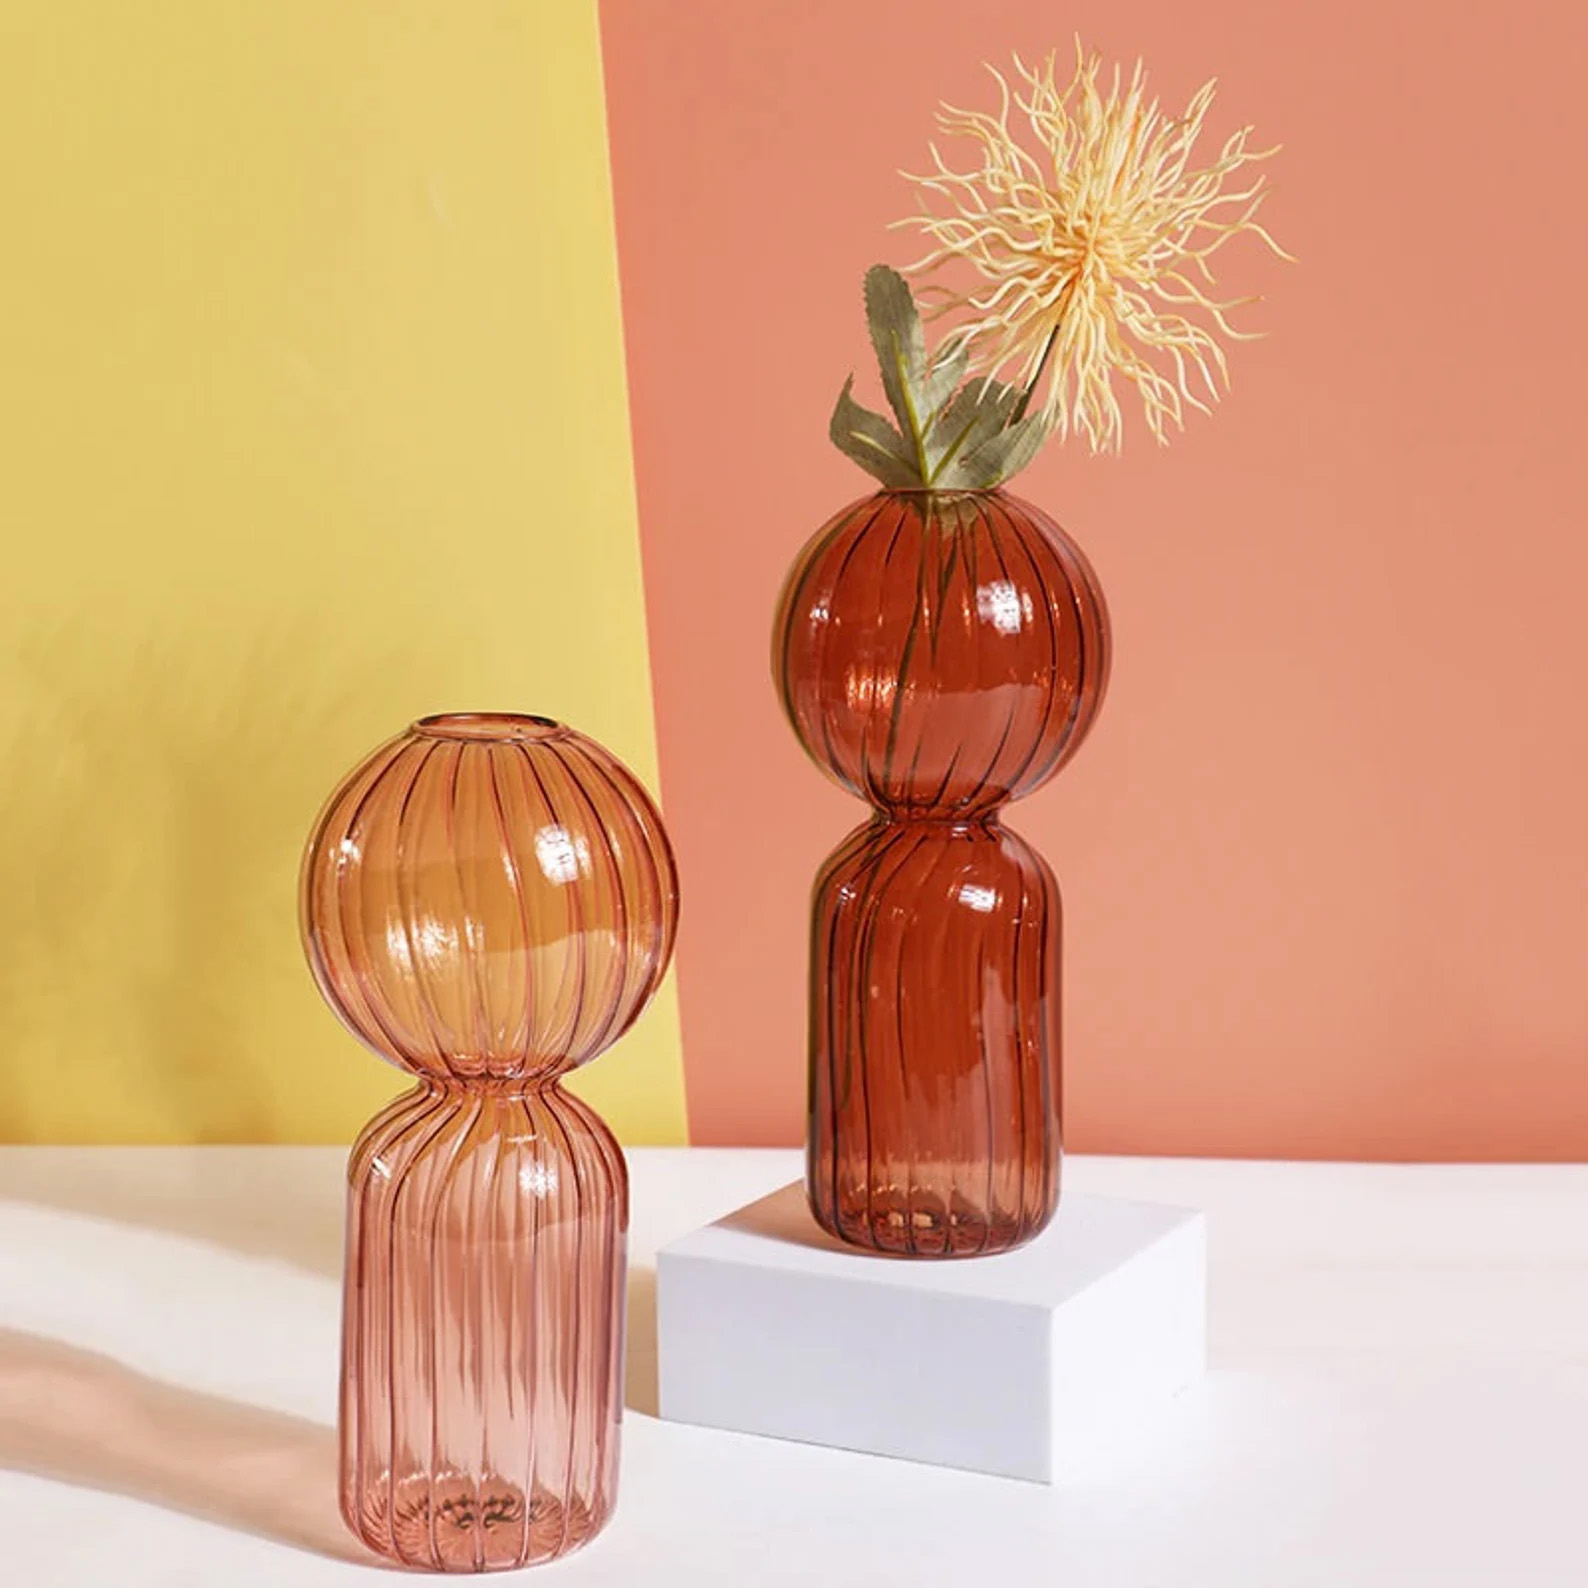 An image of two decorative flower vases